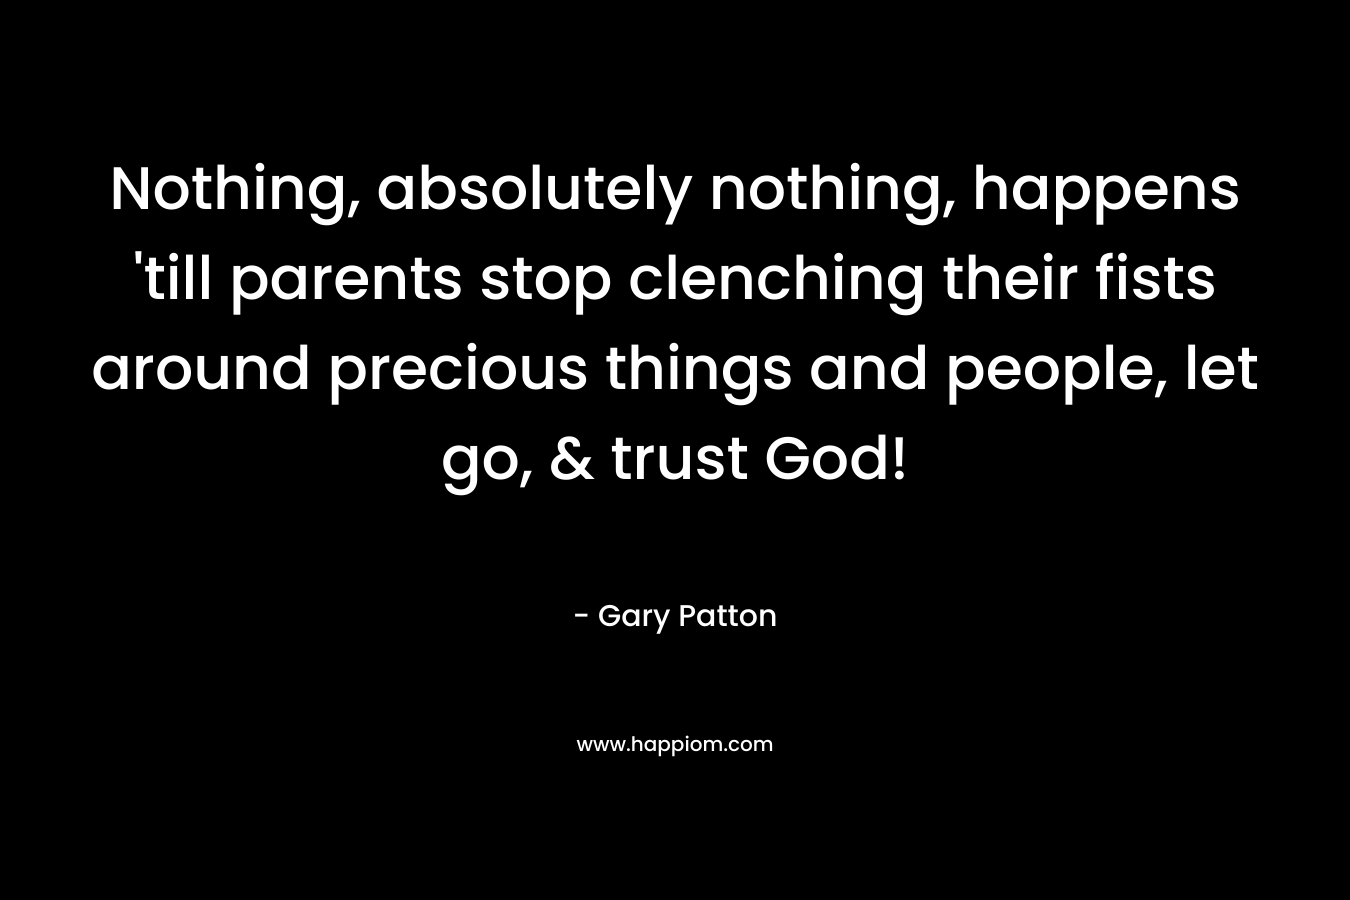 Nothing, absolutely nothing, happens 'till parents stop clenching their fists around precious things and people, let go, & trust God!